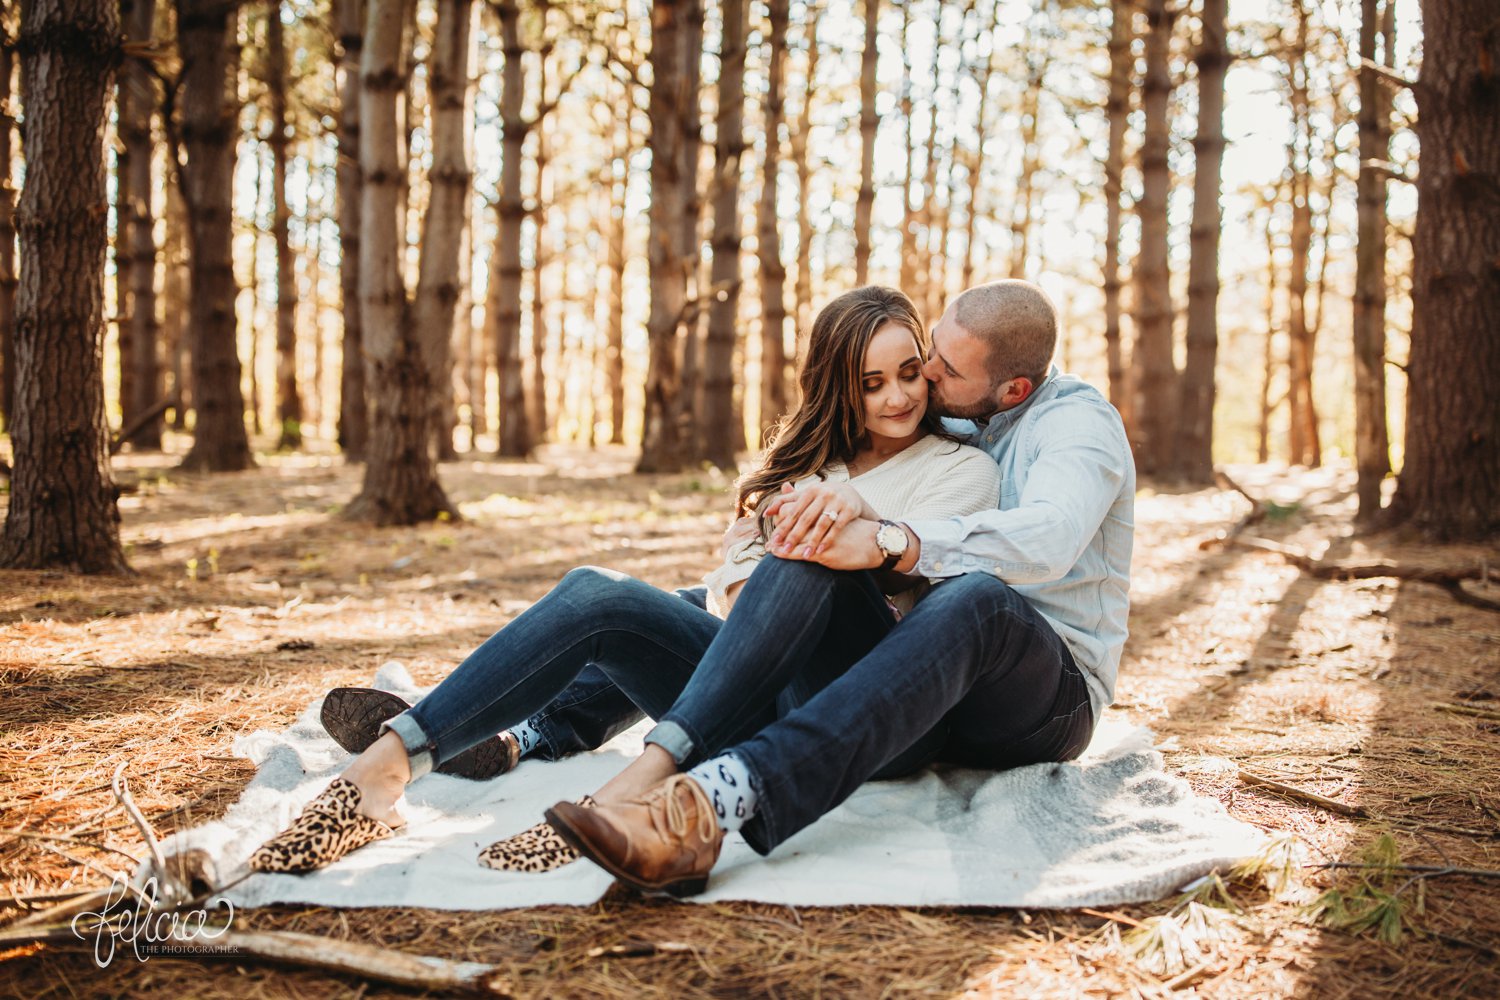 images by feliciathephotographer.com | The Forest | engagement photos | wedding photographer | engagement photographer | forest | sunrise | sitting down | blanket | cheetah print | shoes | brown | kc socks | kissing | smiling | 